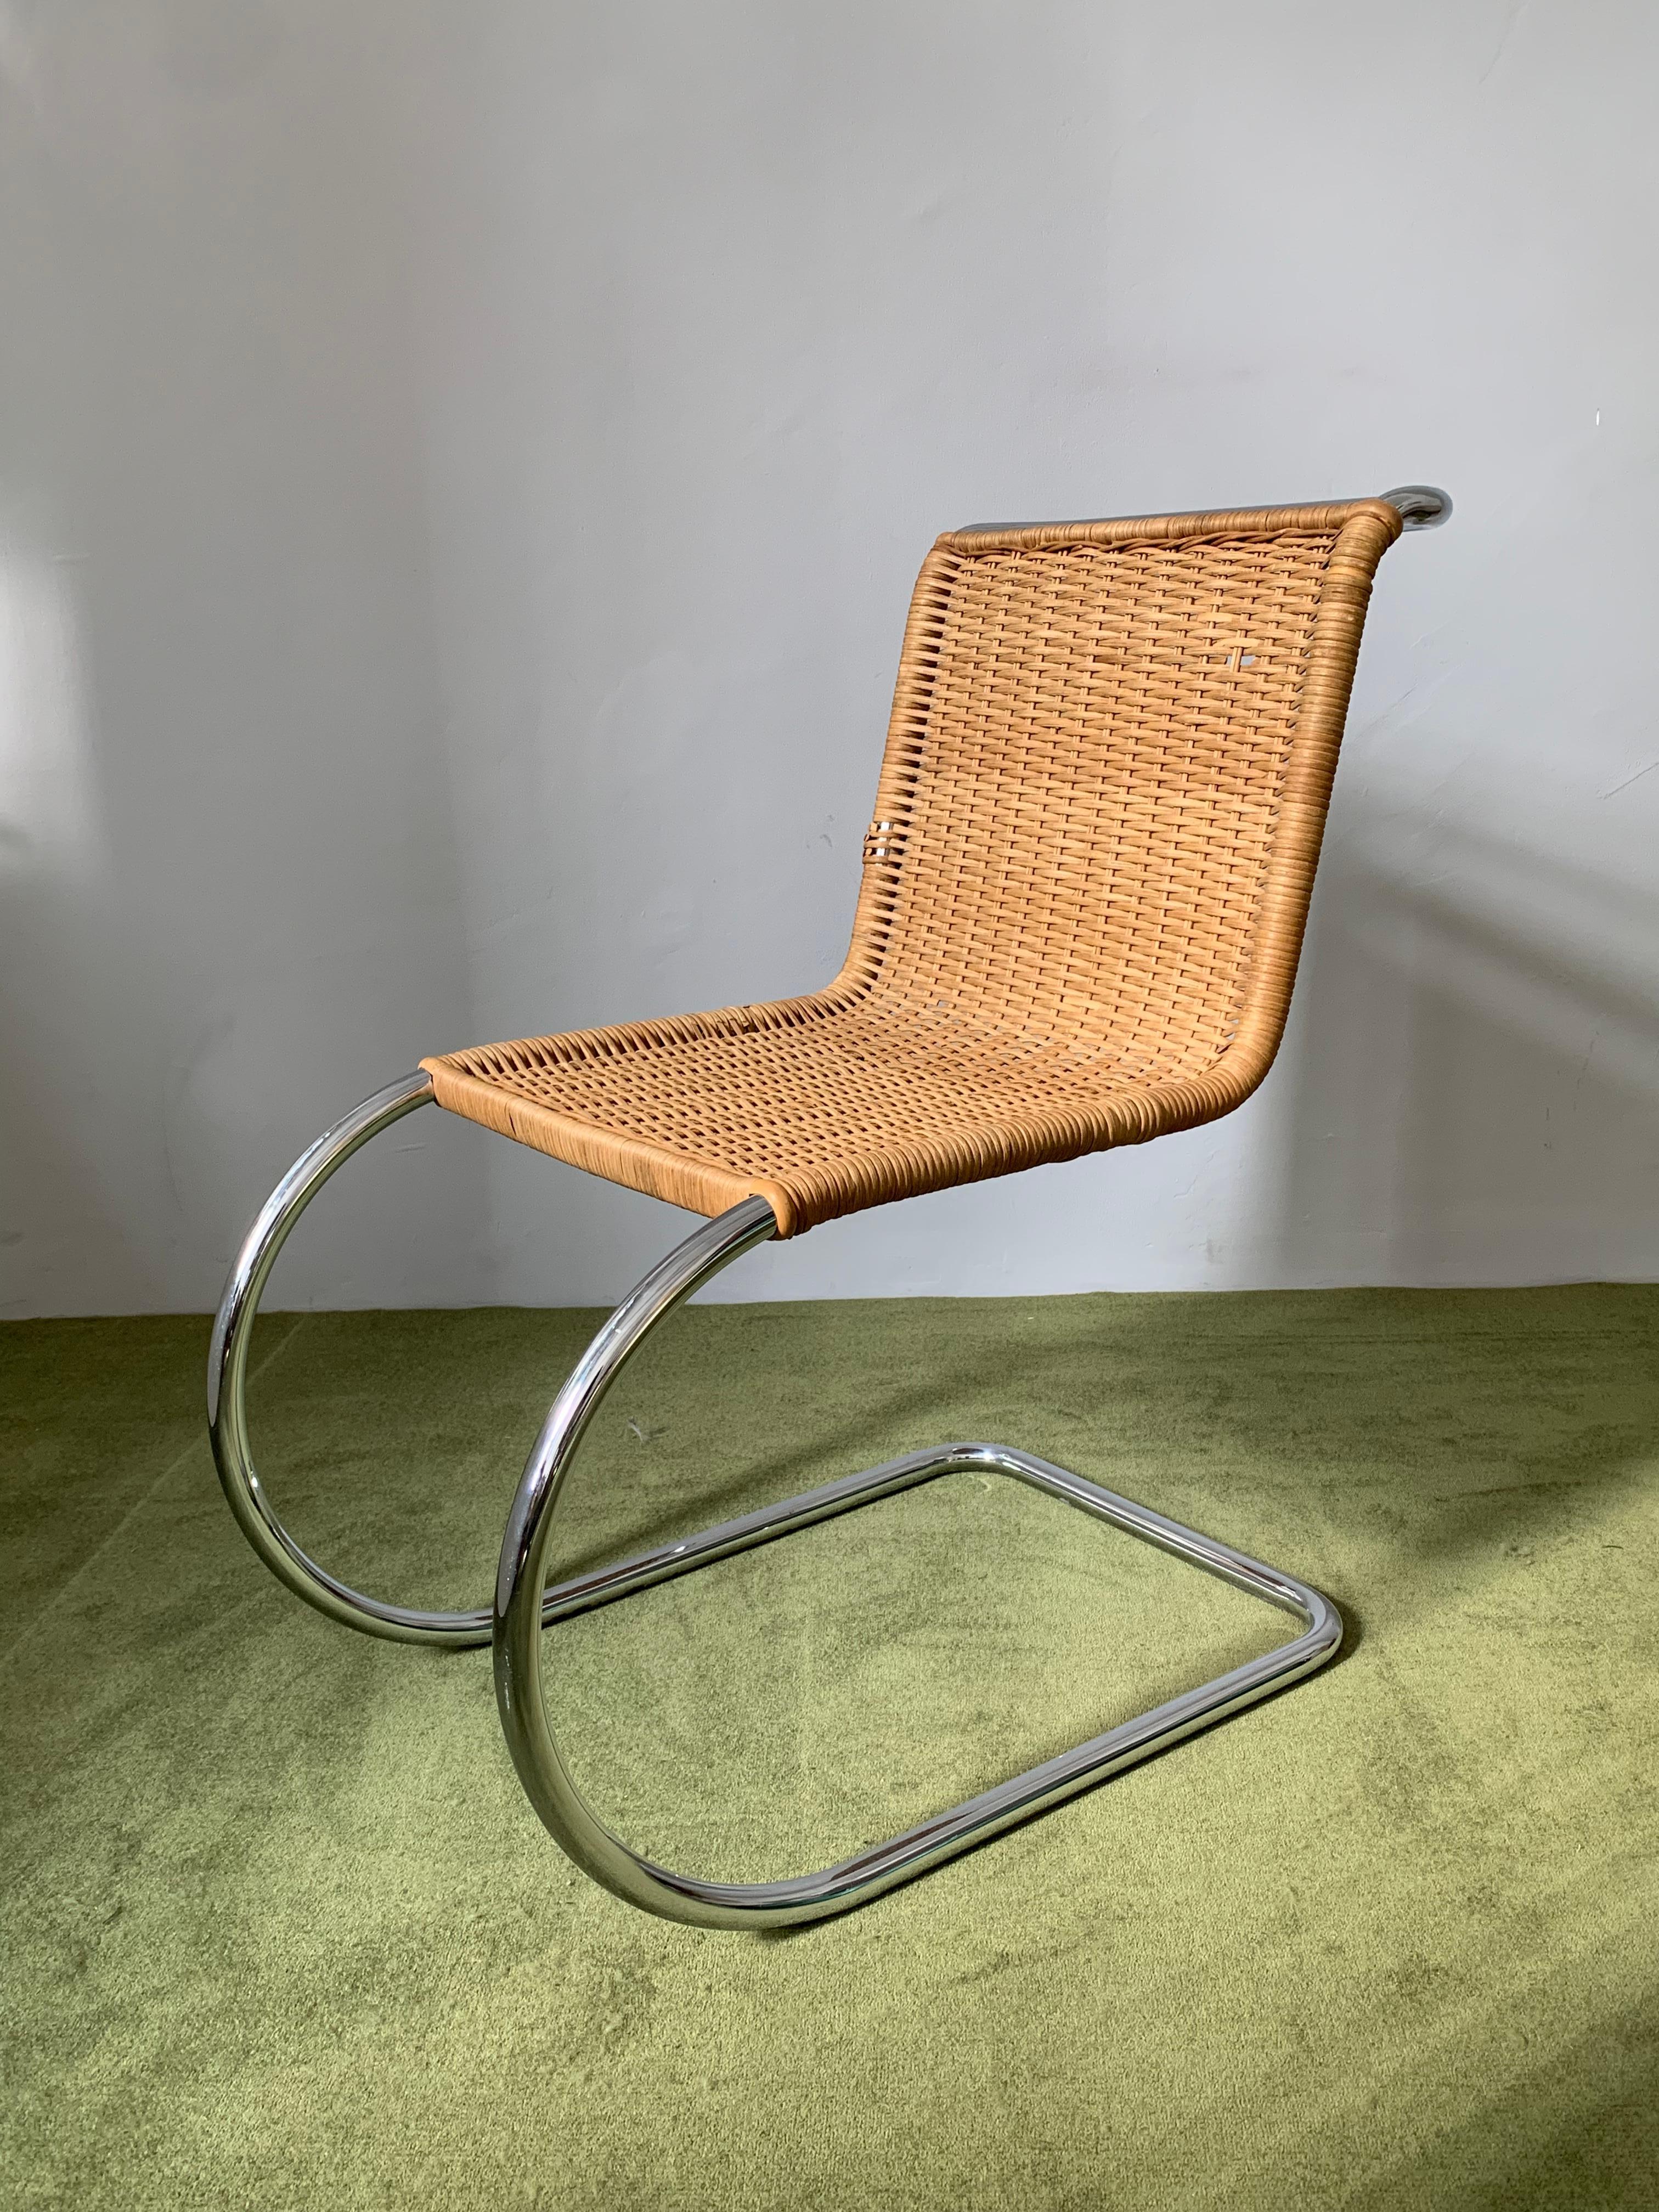 First designed in 1927, this chair’s deceptively simple design embodies the “less is more” philosophy of Mies van der Rohe. The modern chrome finish sharply contrasts with the natural woven-cane seat and back, creating a streamlined